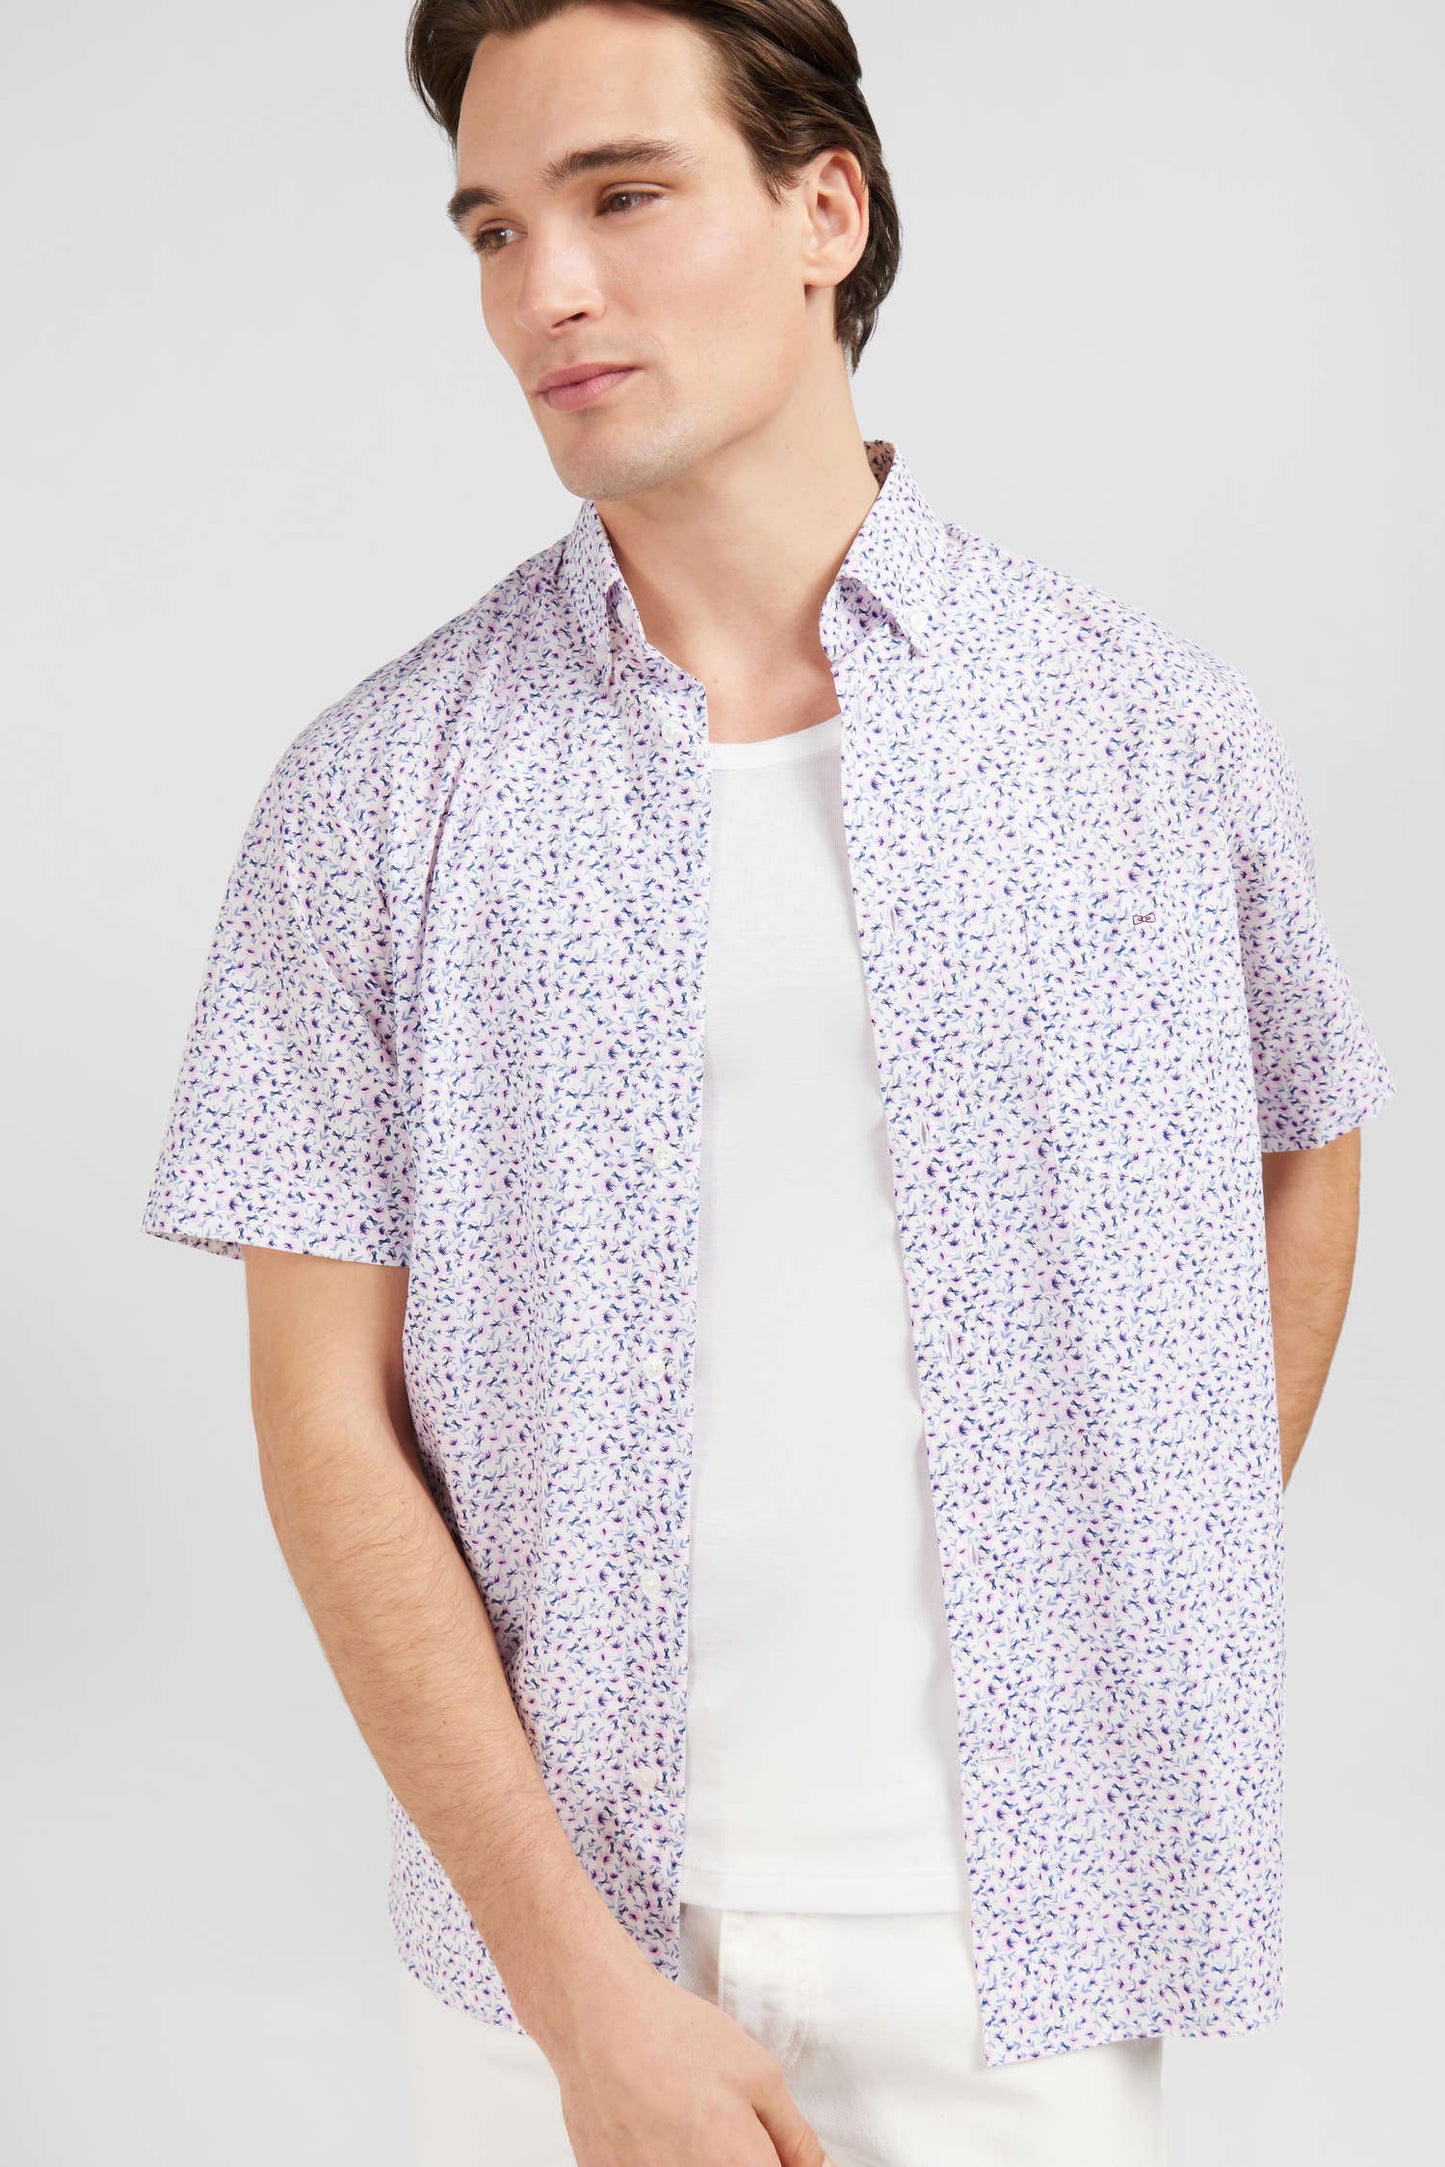 White shirt with exclusive floral print - Image 3